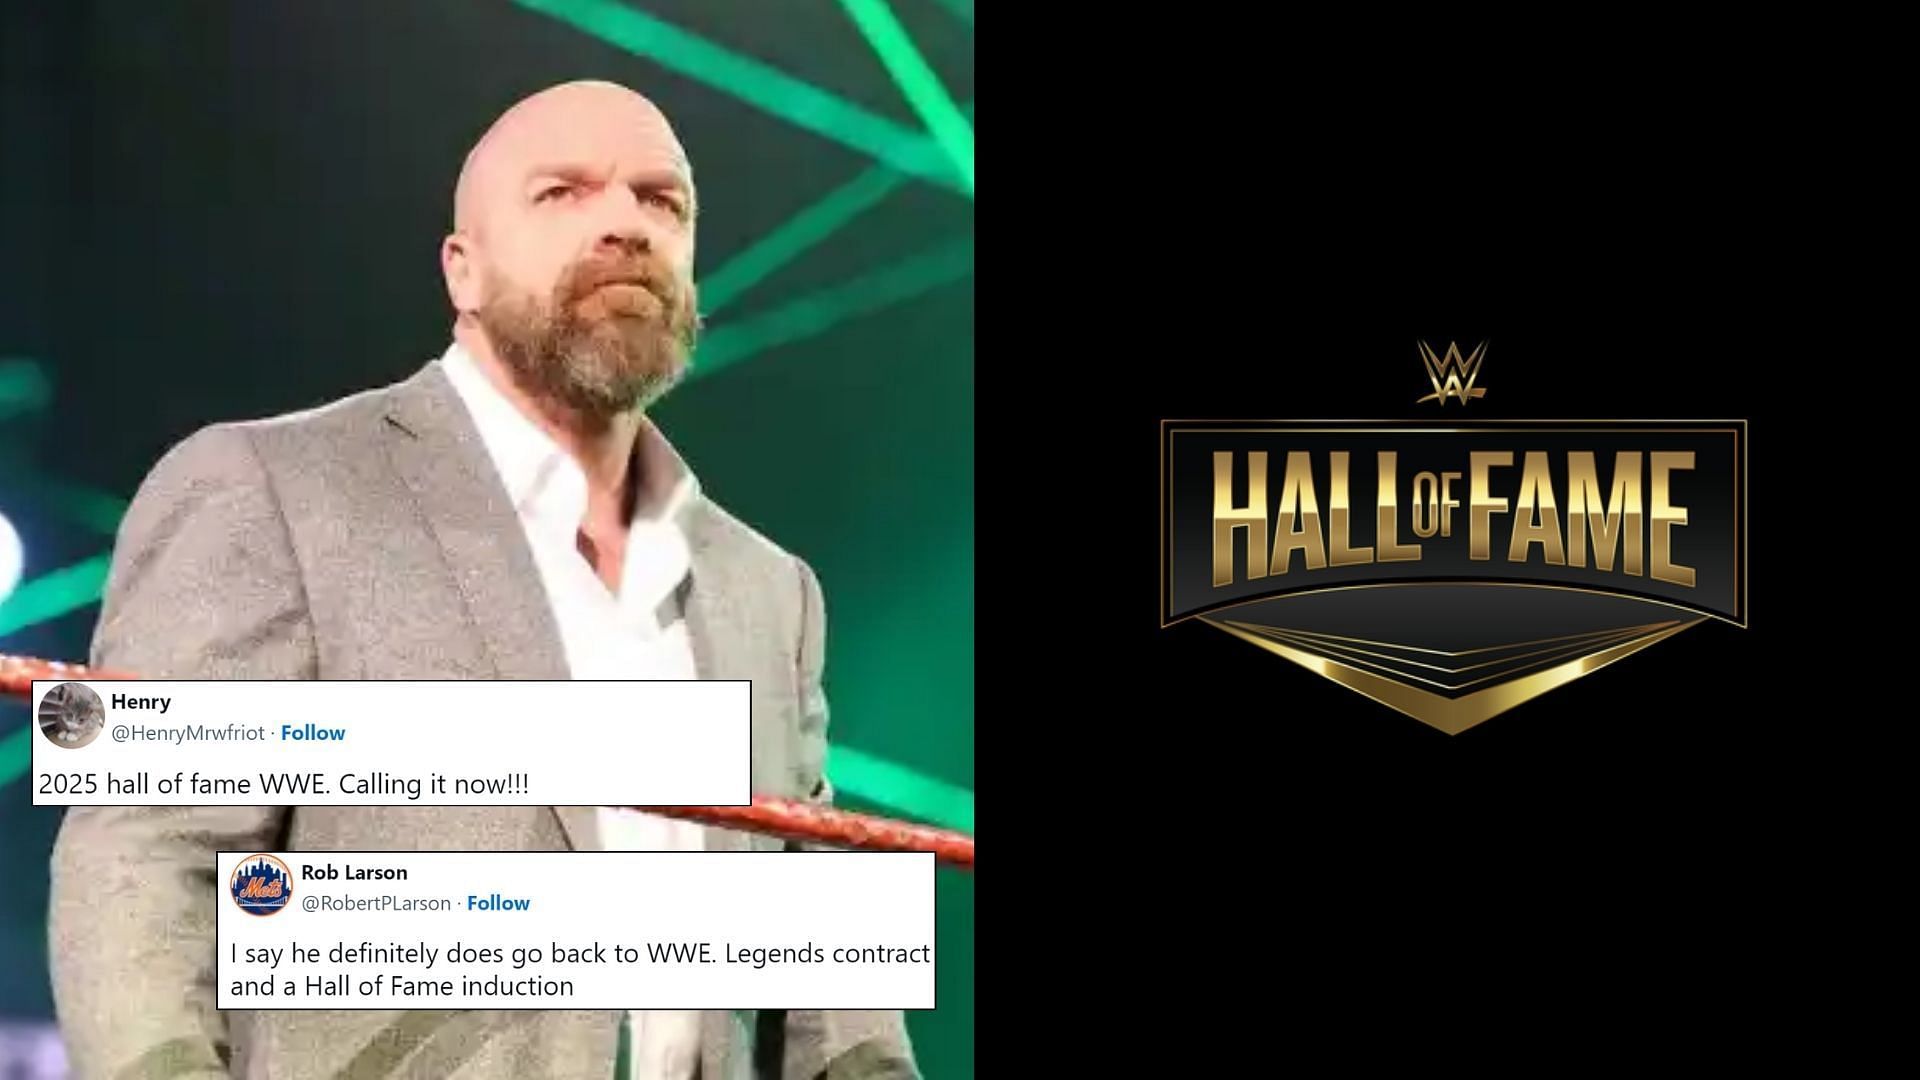 "2025 hall of fame WWE. Calling it now!!!" Fans are convinced 4time